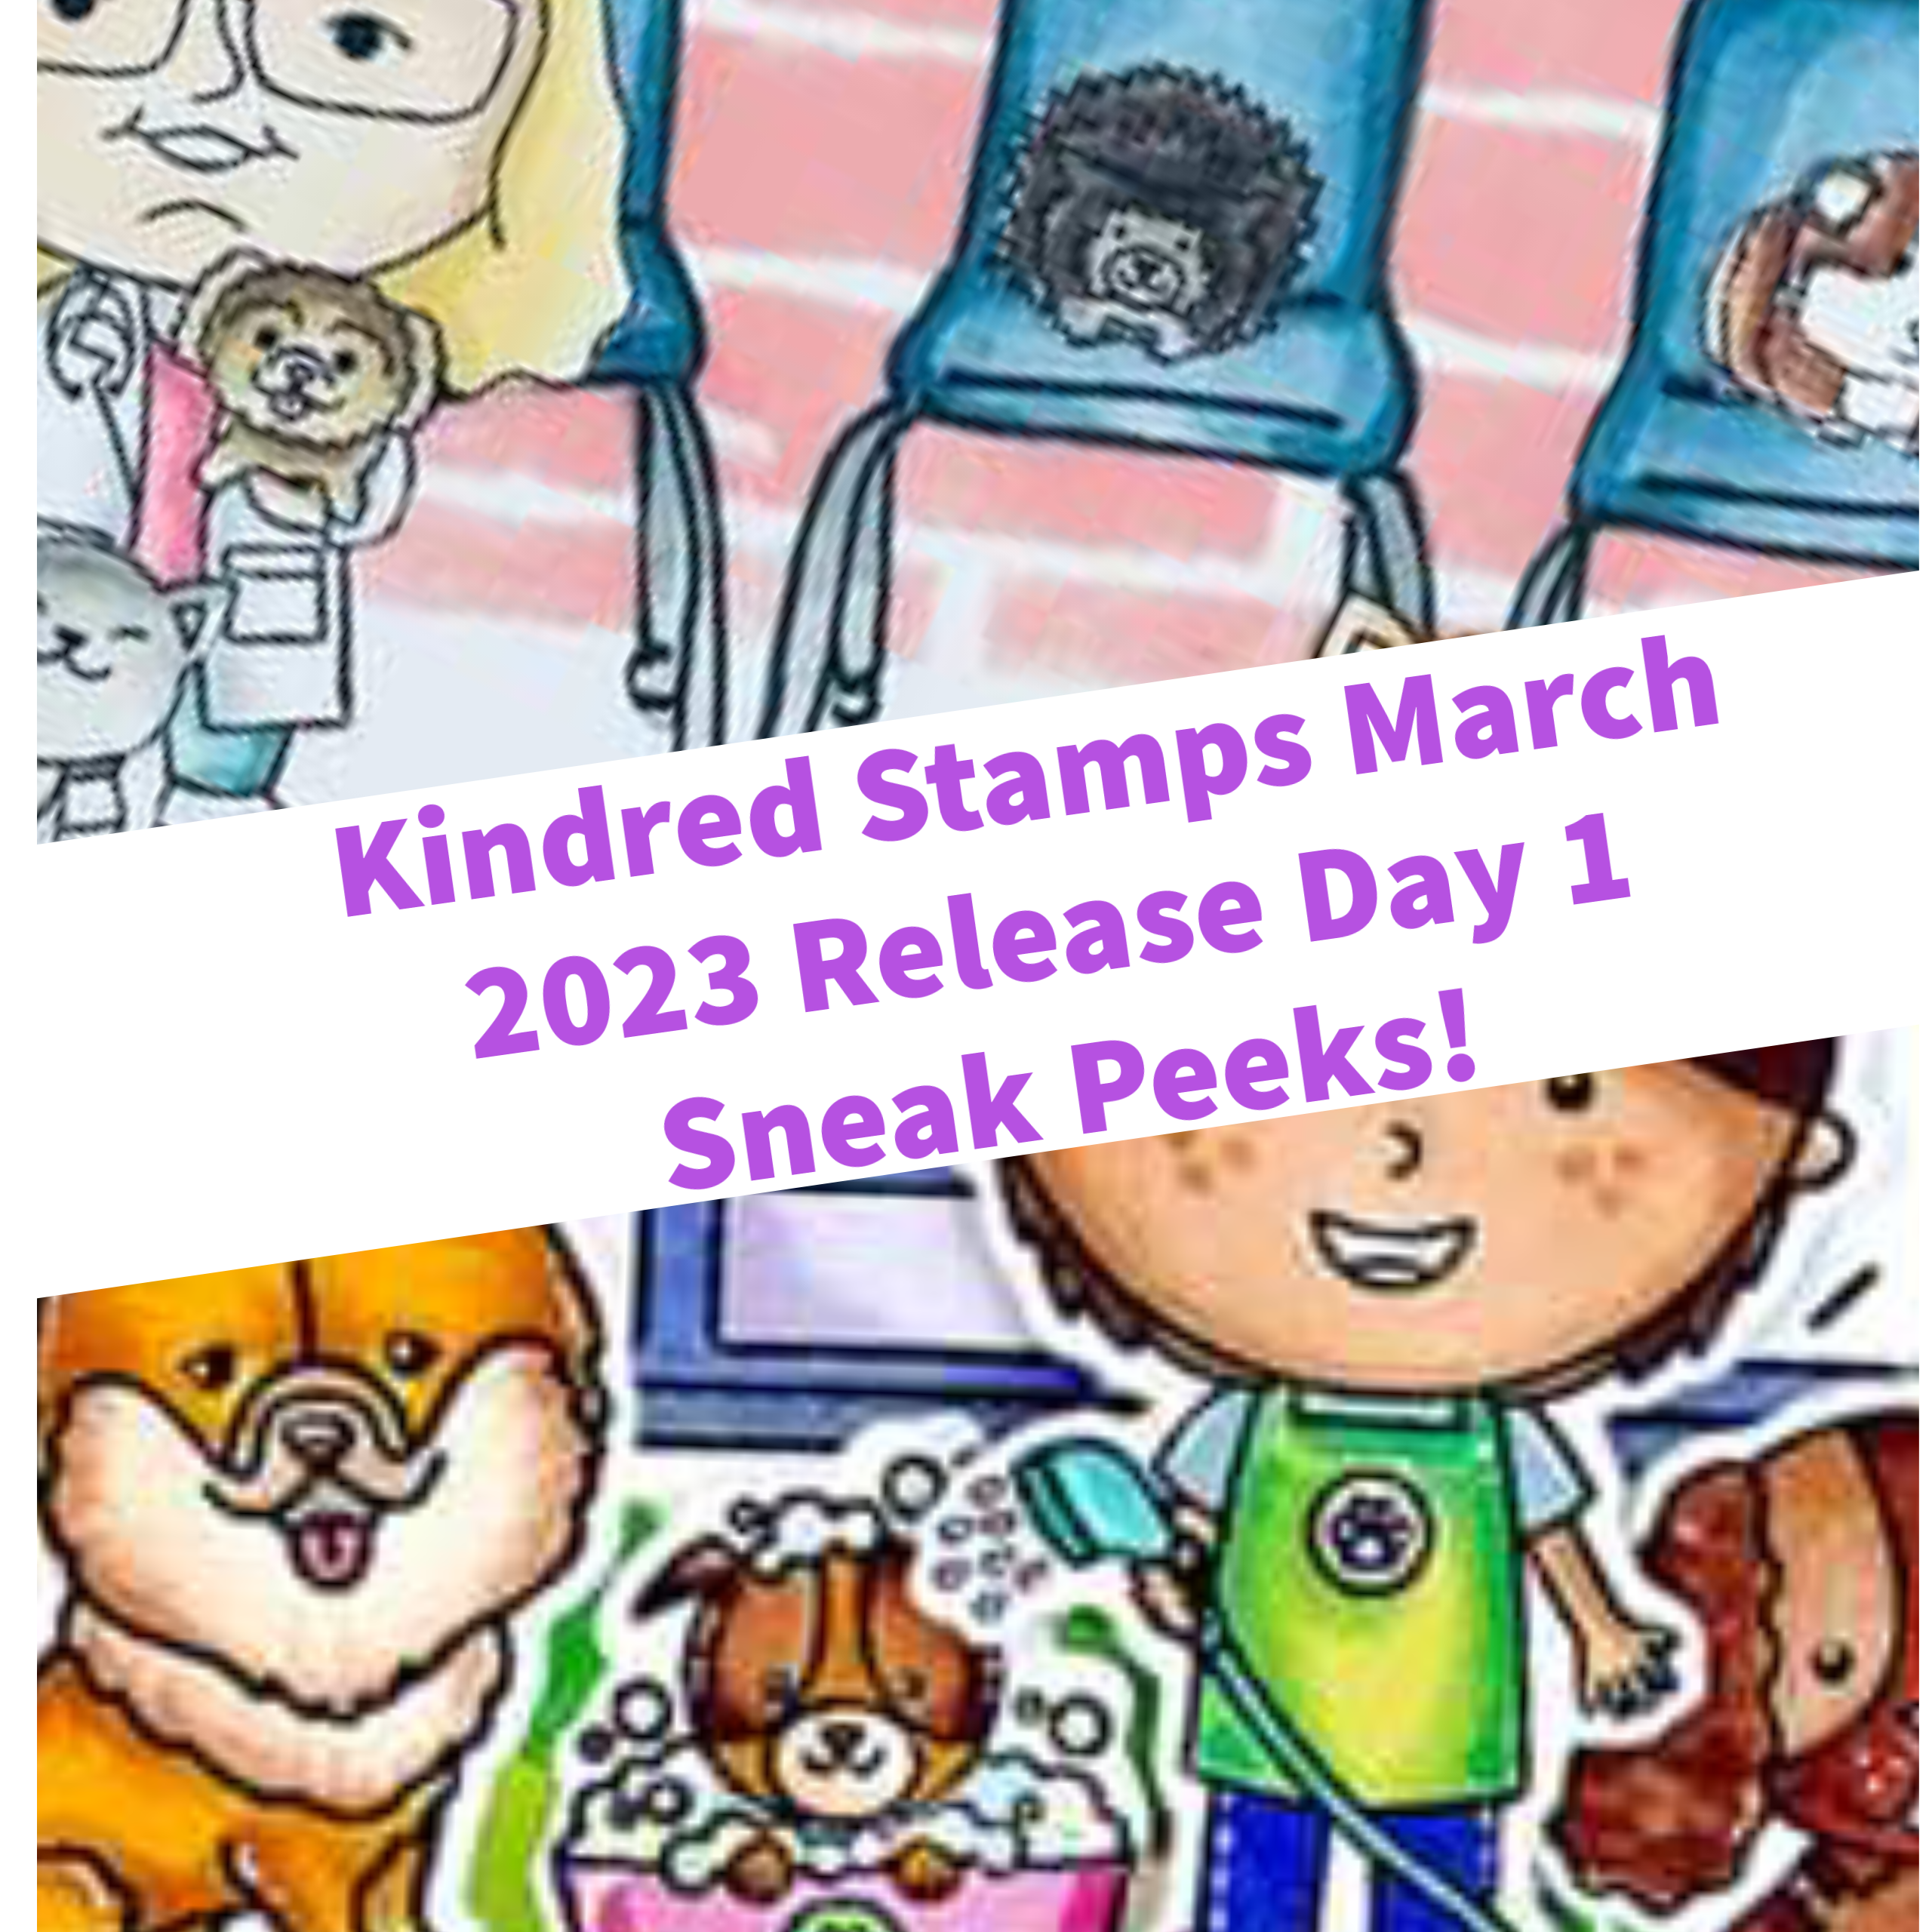 March Release Day 1-Kindred Career: Pet Care